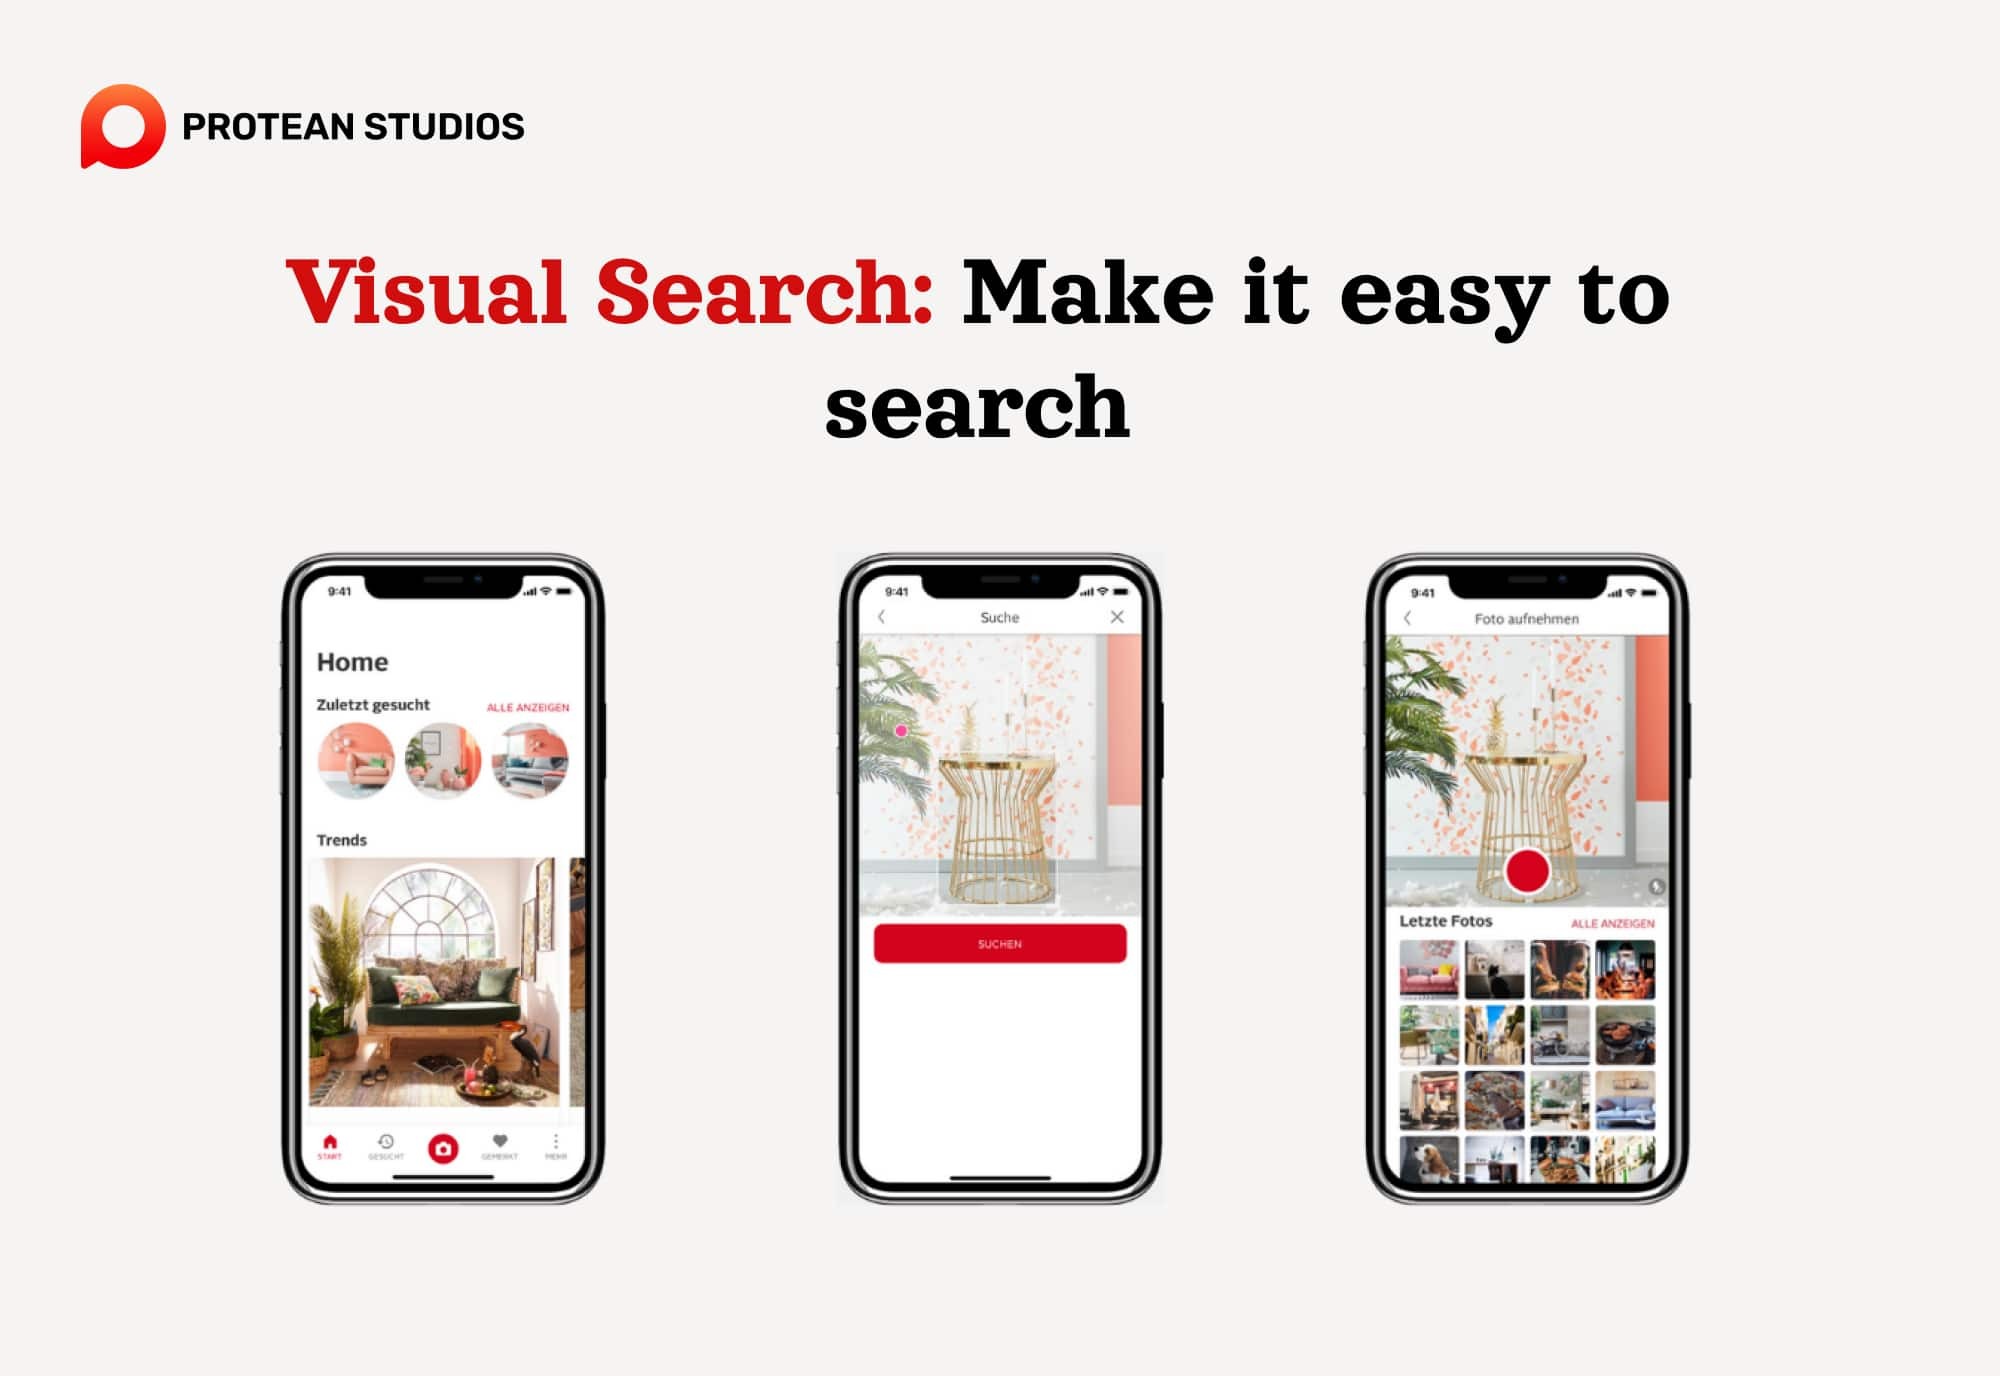 Make it easy to research with visual search